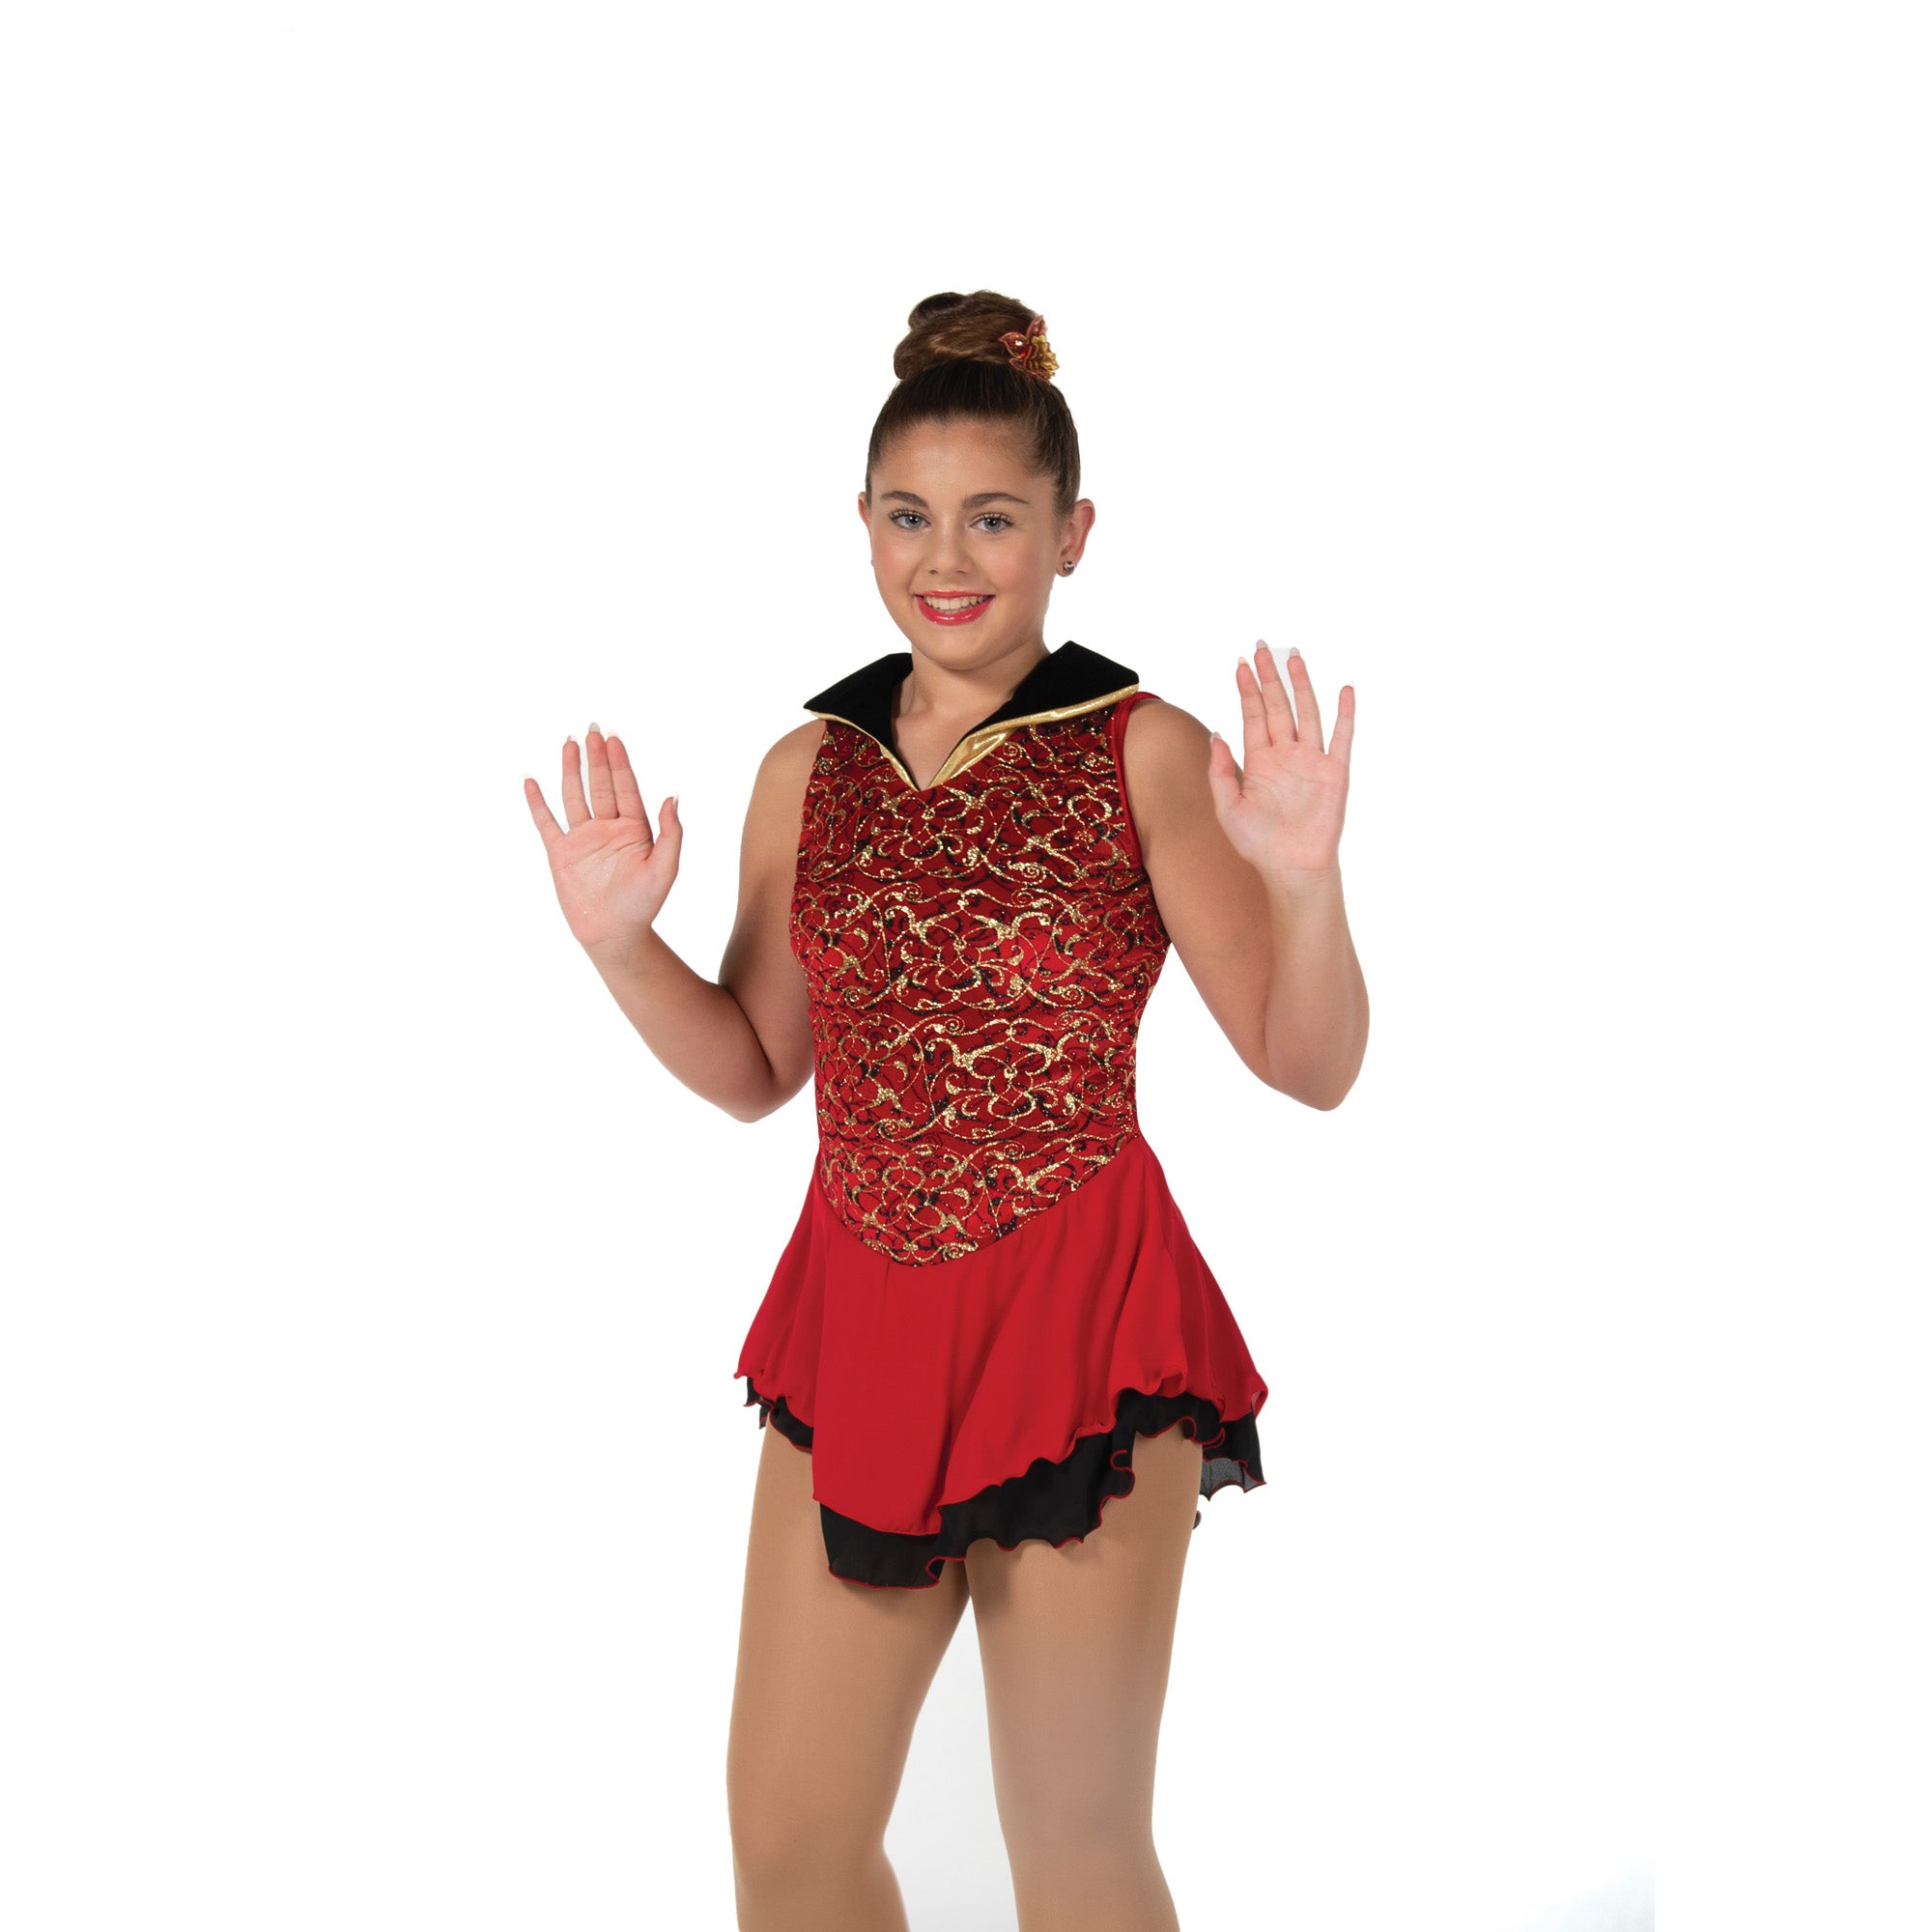 79 Choreograph Skating Dress in Red, Black & Gold by Jerry's